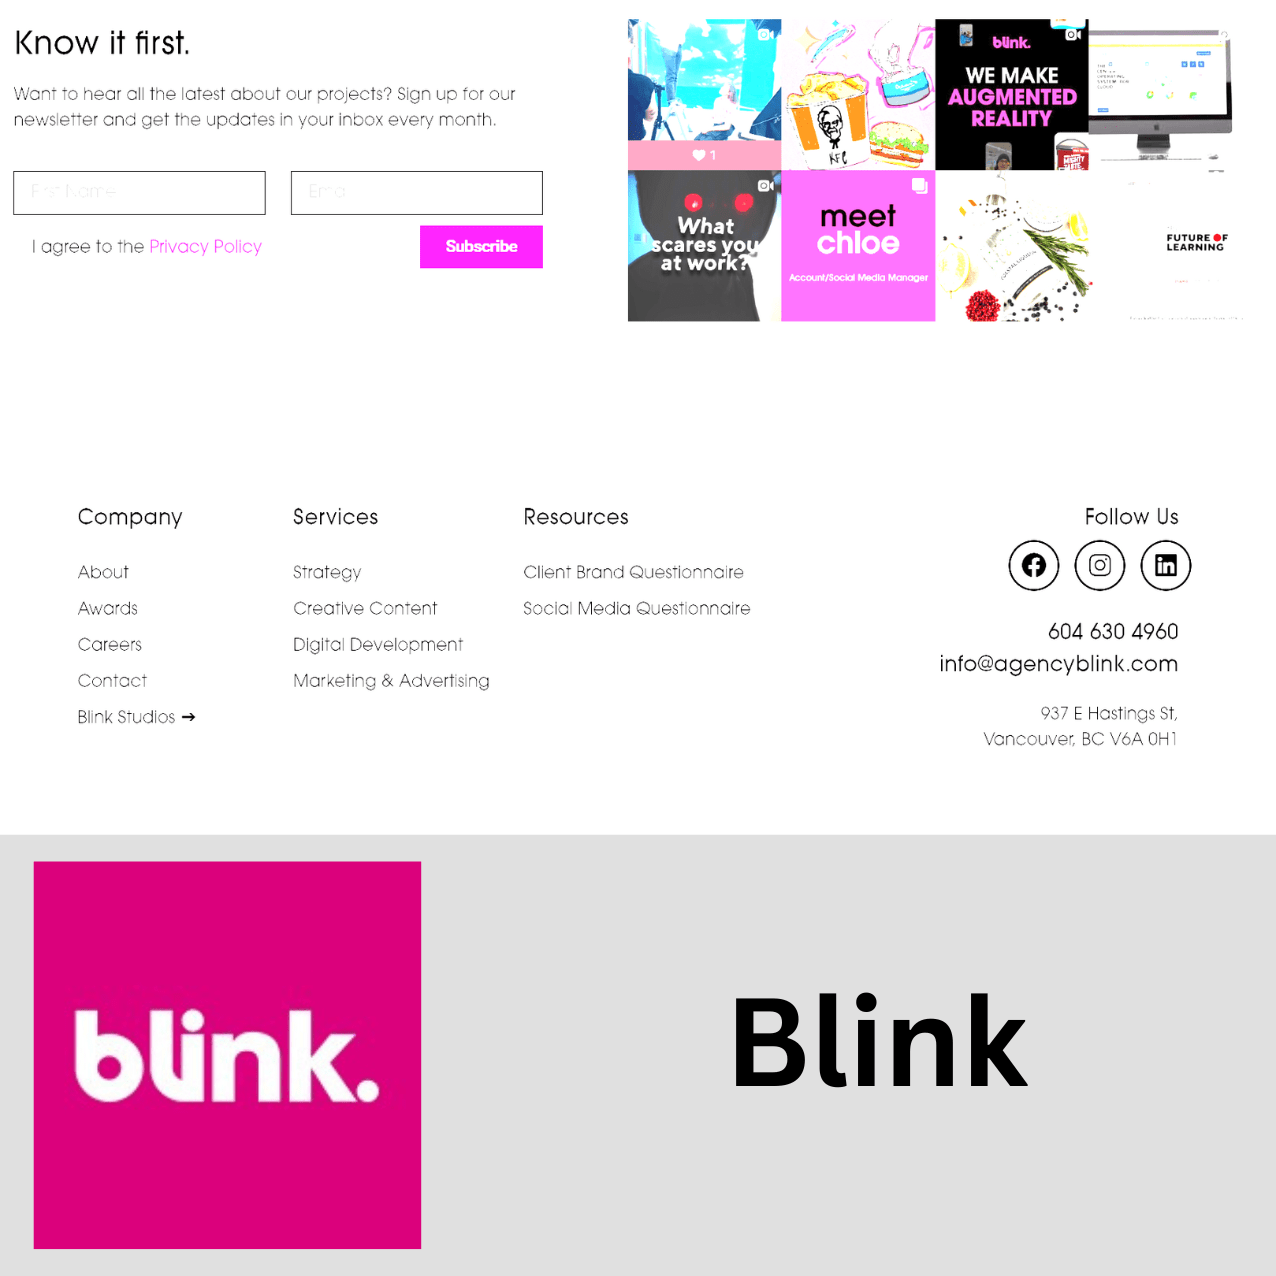 Blink project image